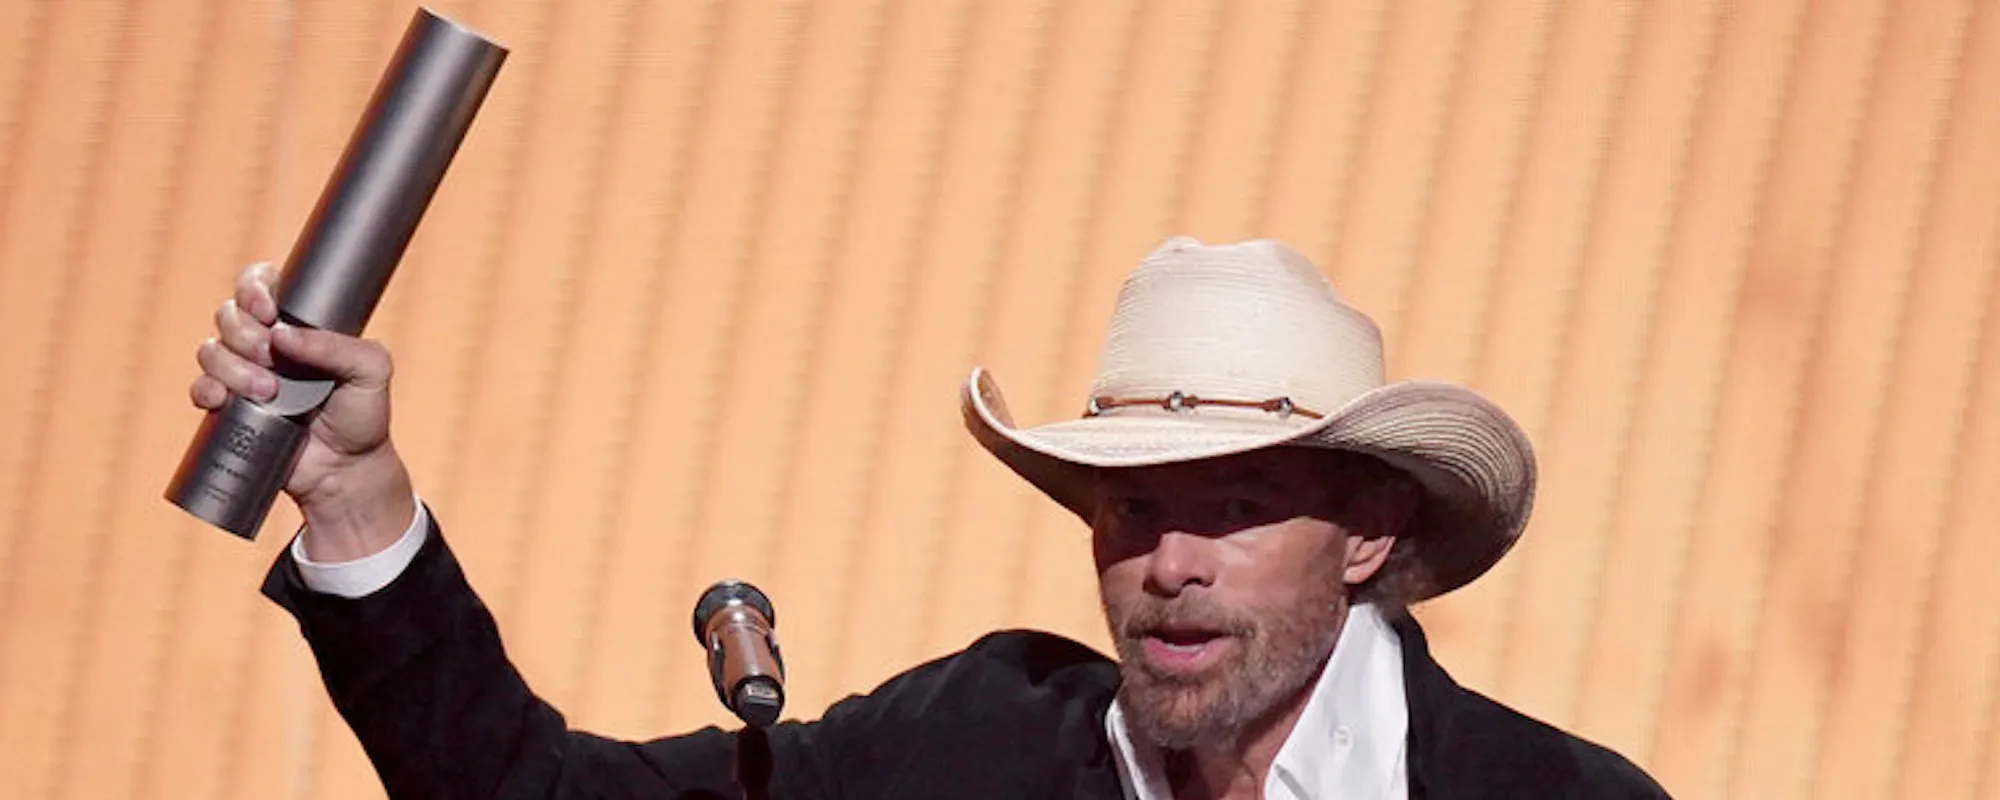 Toby Keith Receives 2023 People's Choice Country Awards Music Icon